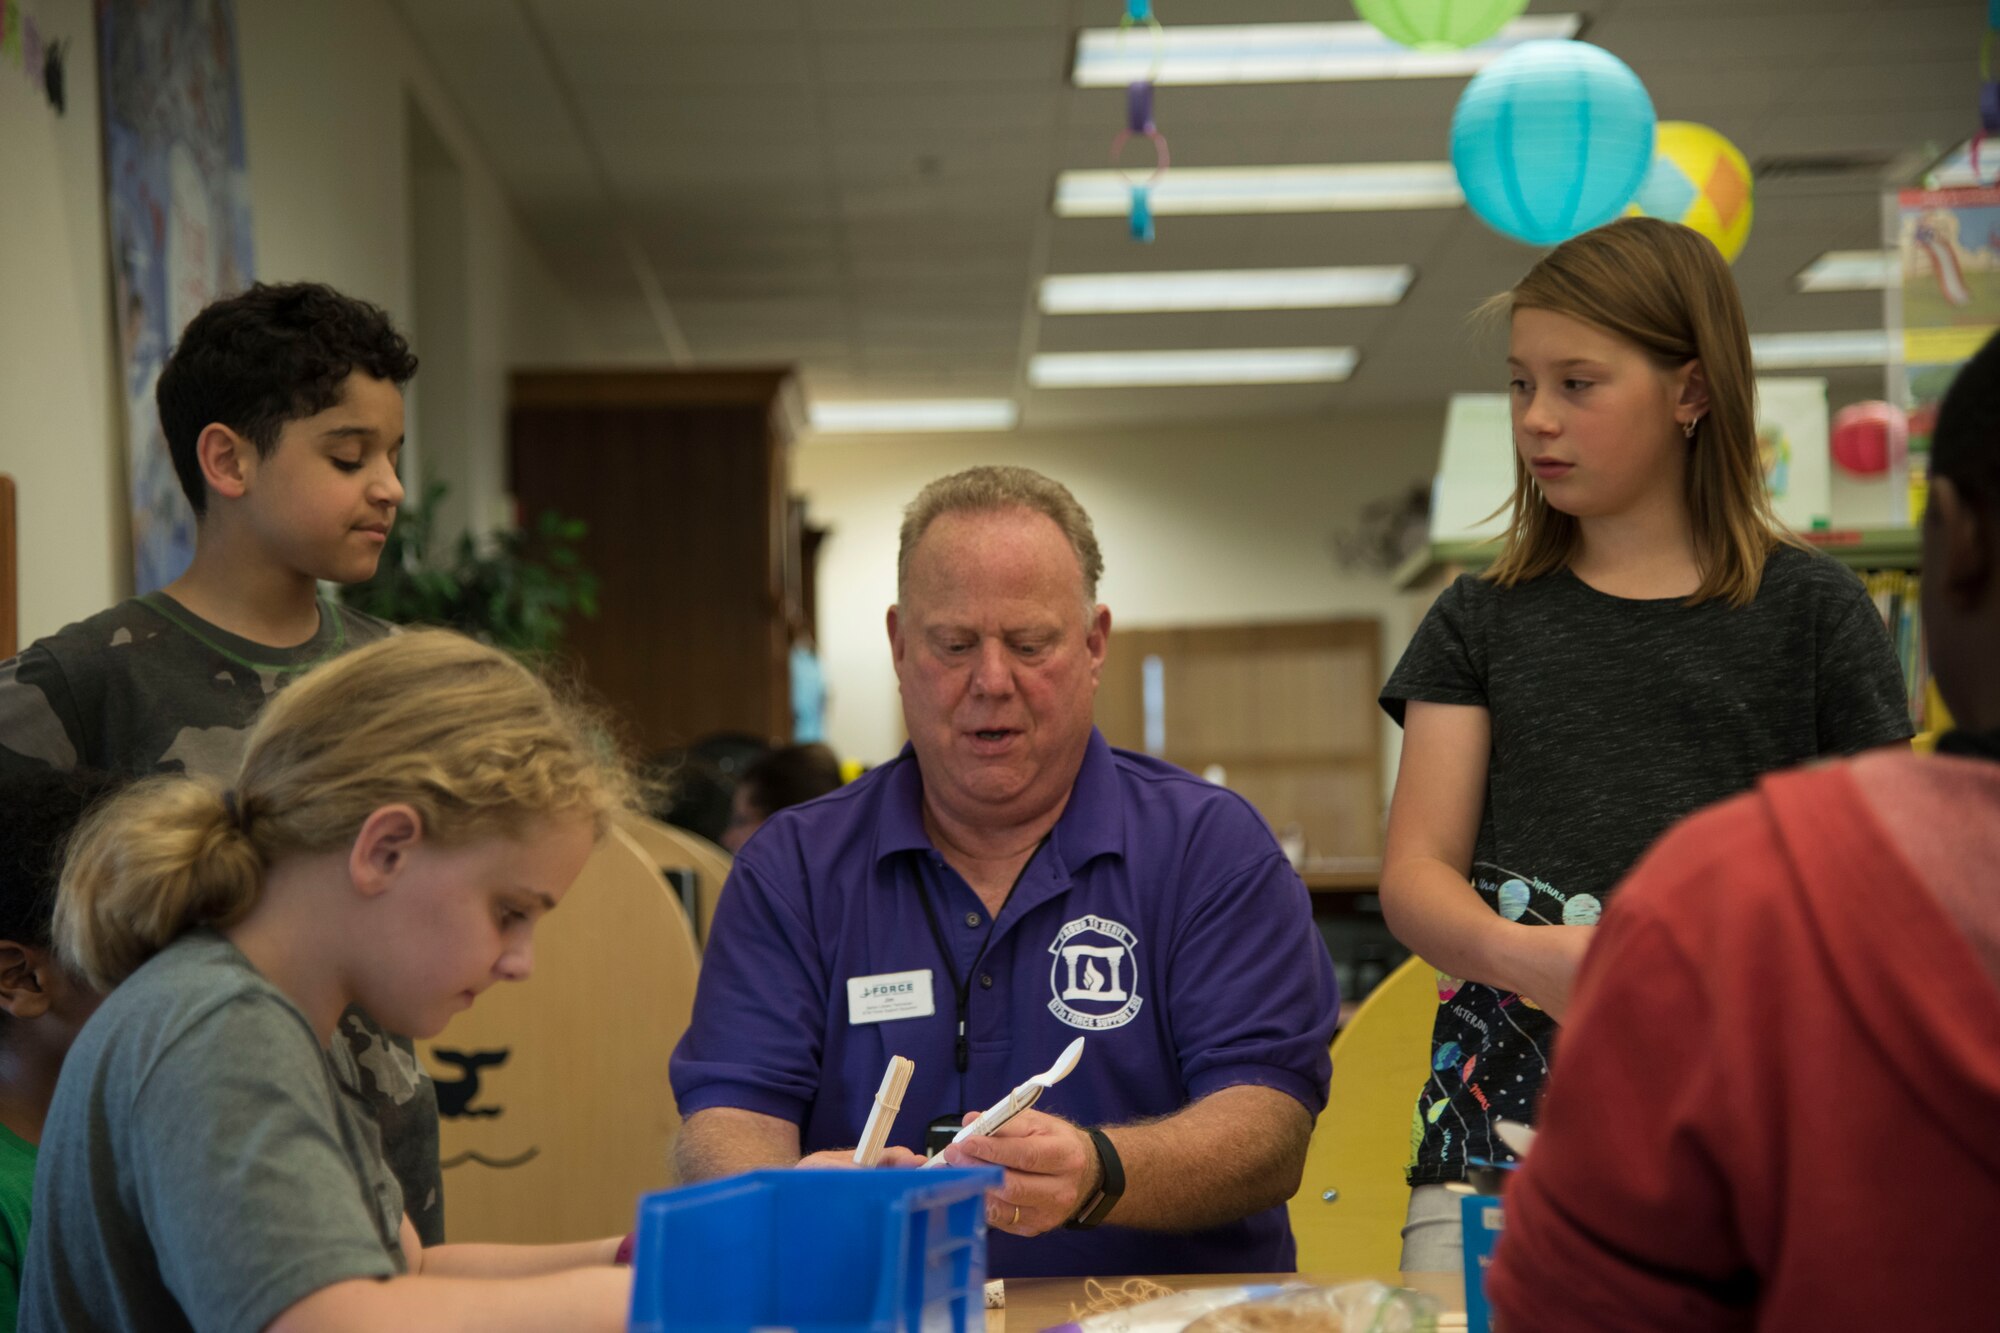 Jim Campbell, Joint Base Elmendorf-Richardson Library technician, builds a catapult with Science Club attendees at the JBER Library, July 5, 2018. JBER Library staff create unique Science, Technology Engineering and Math experiments year-round for Science Club.